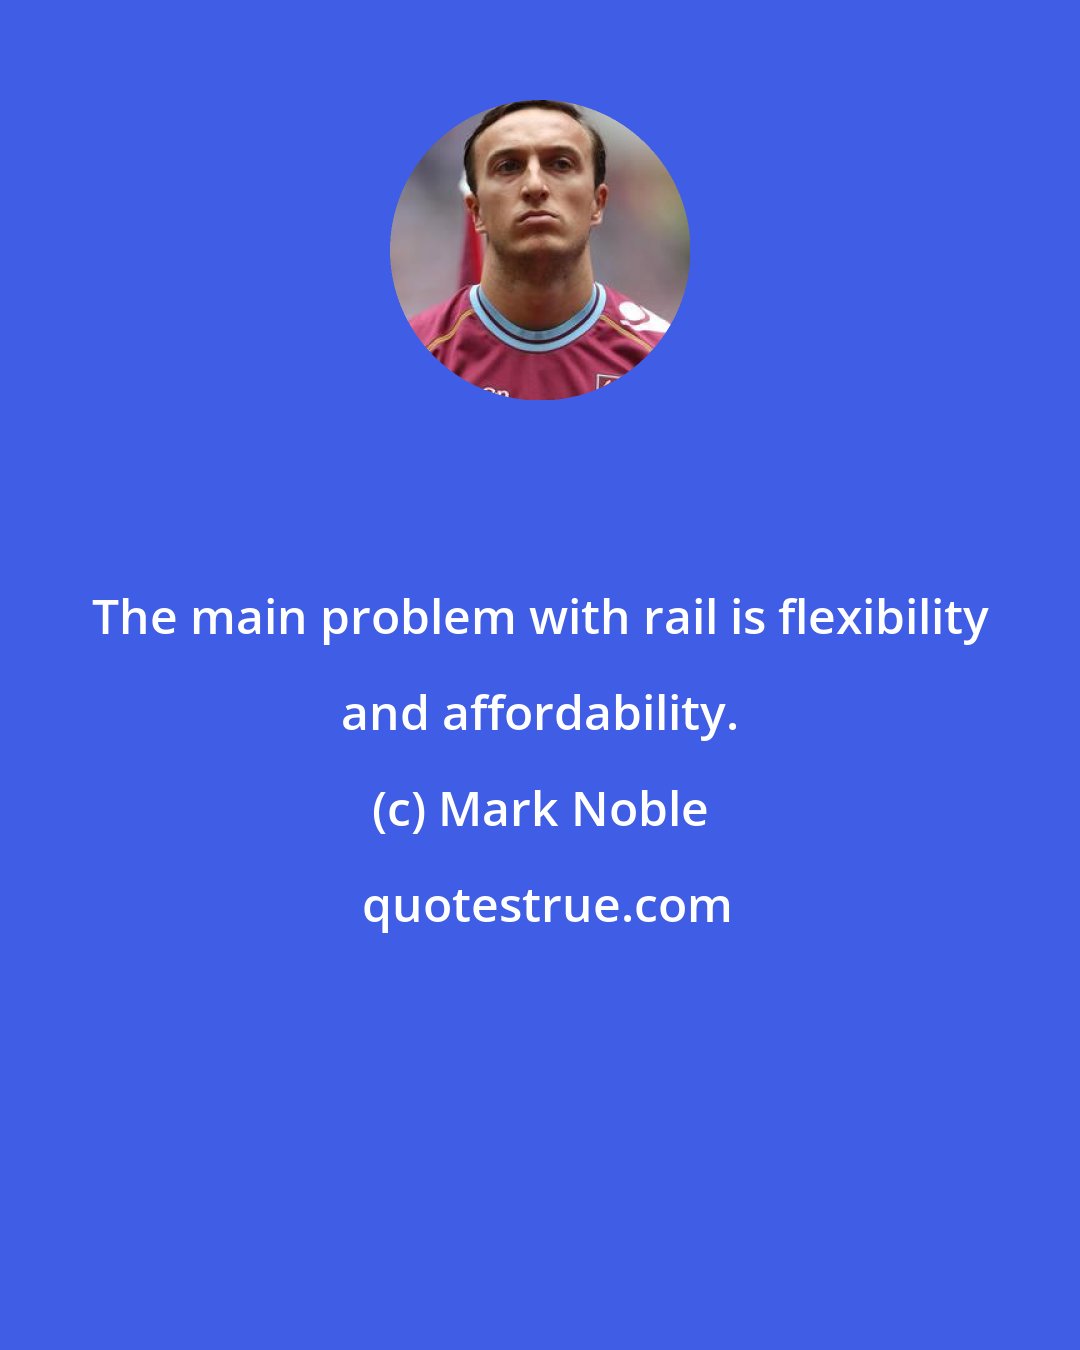 Mark Noble: The main problem with rail is flexibility and affordability.